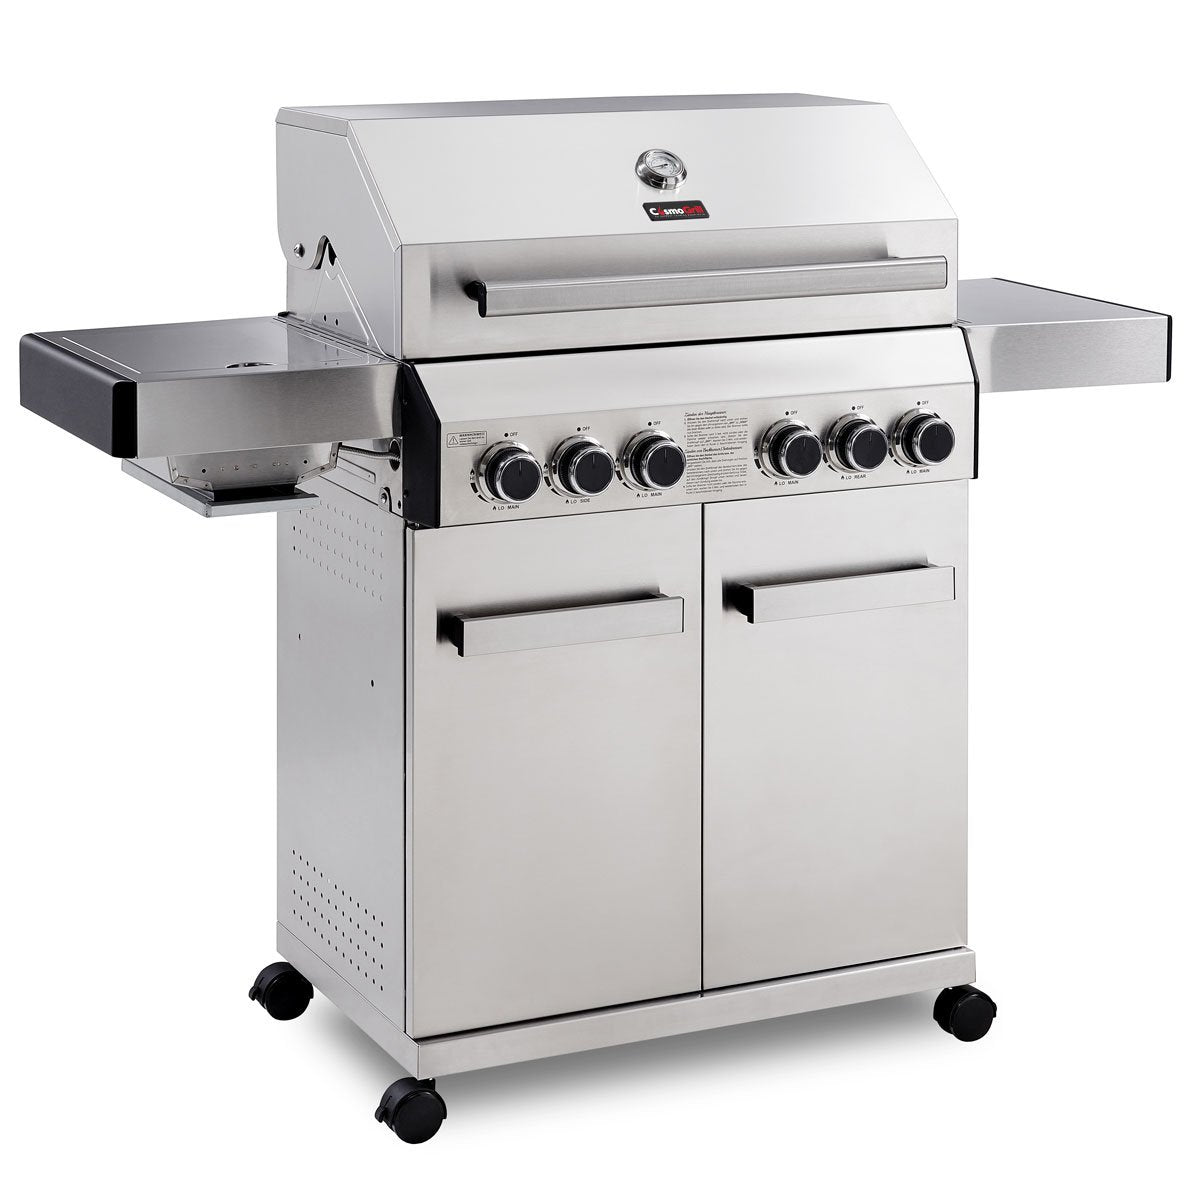 Platinum Stainless Steel 4+2 Gas Barbecue + Cover - CosmoGrill